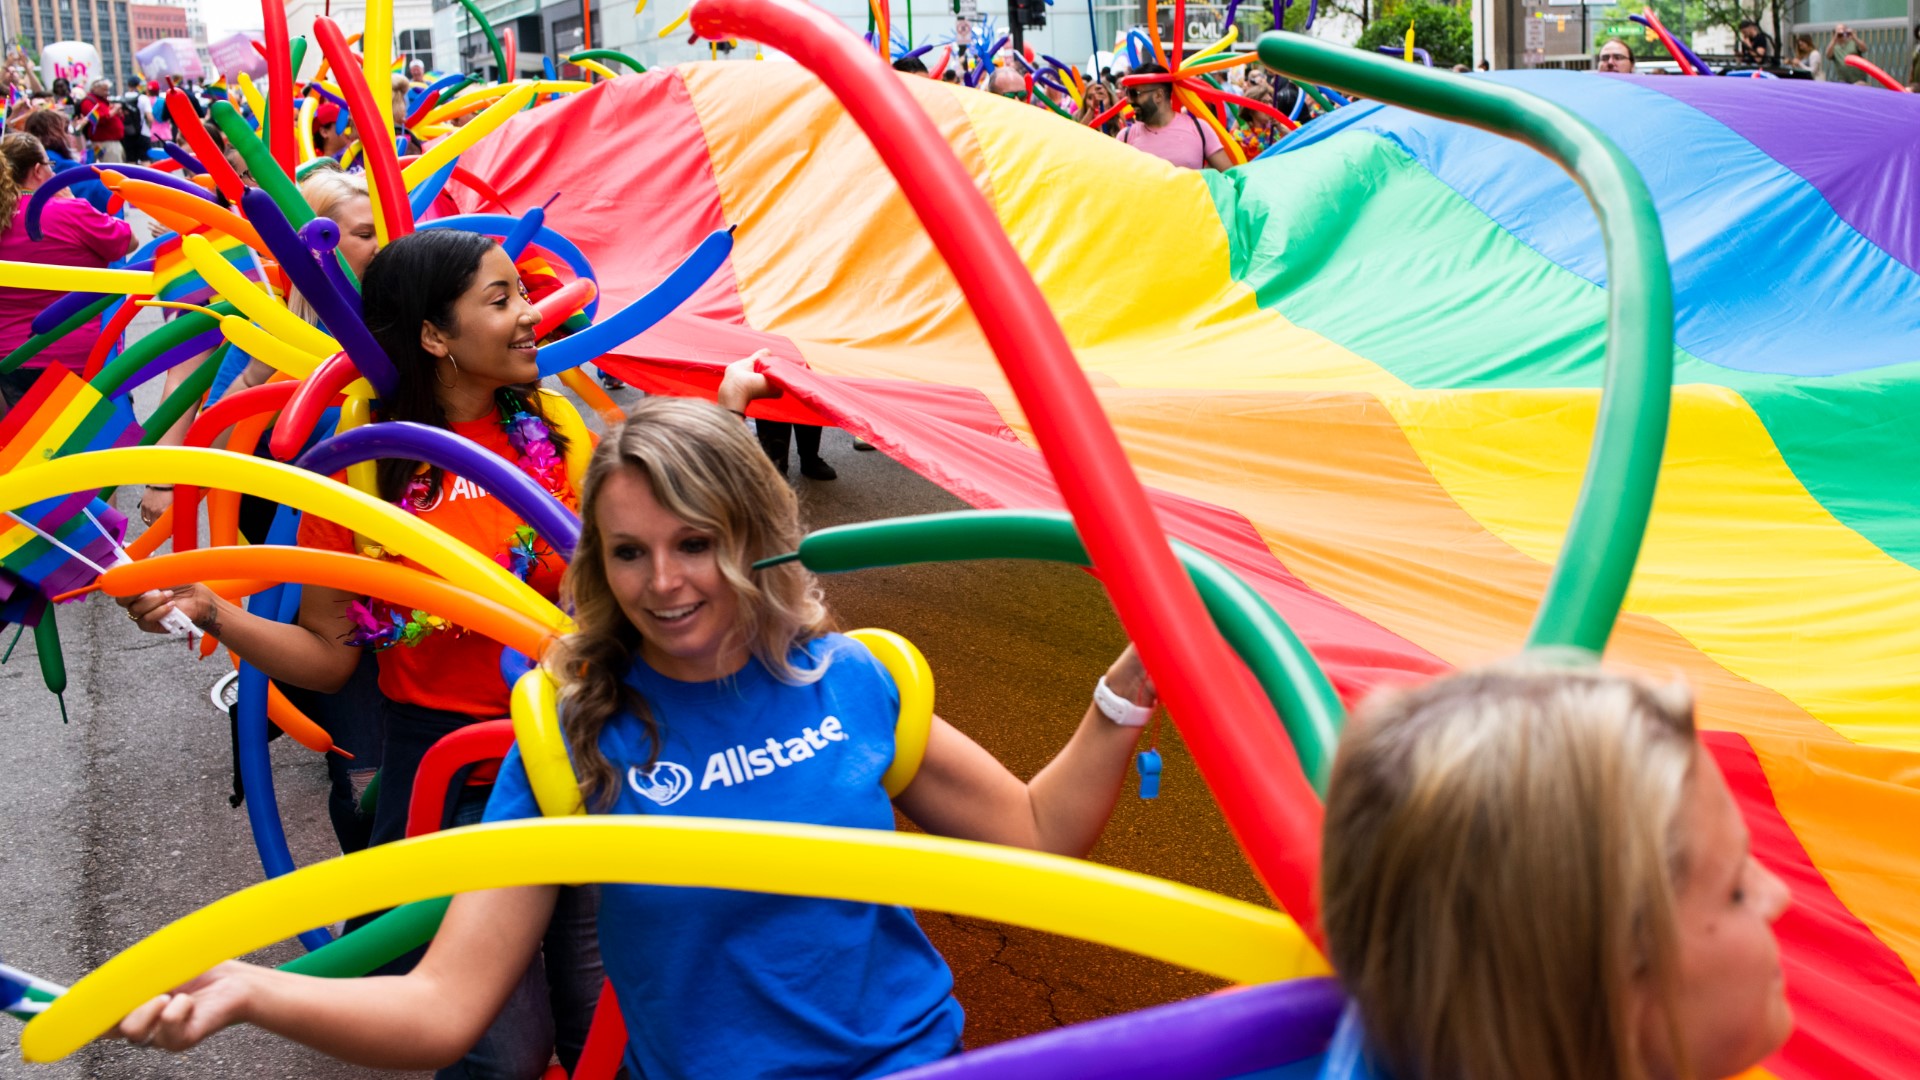 Diversity, inclusion and fun. That is what makes up the annual Grand Rapids Pride Festival.